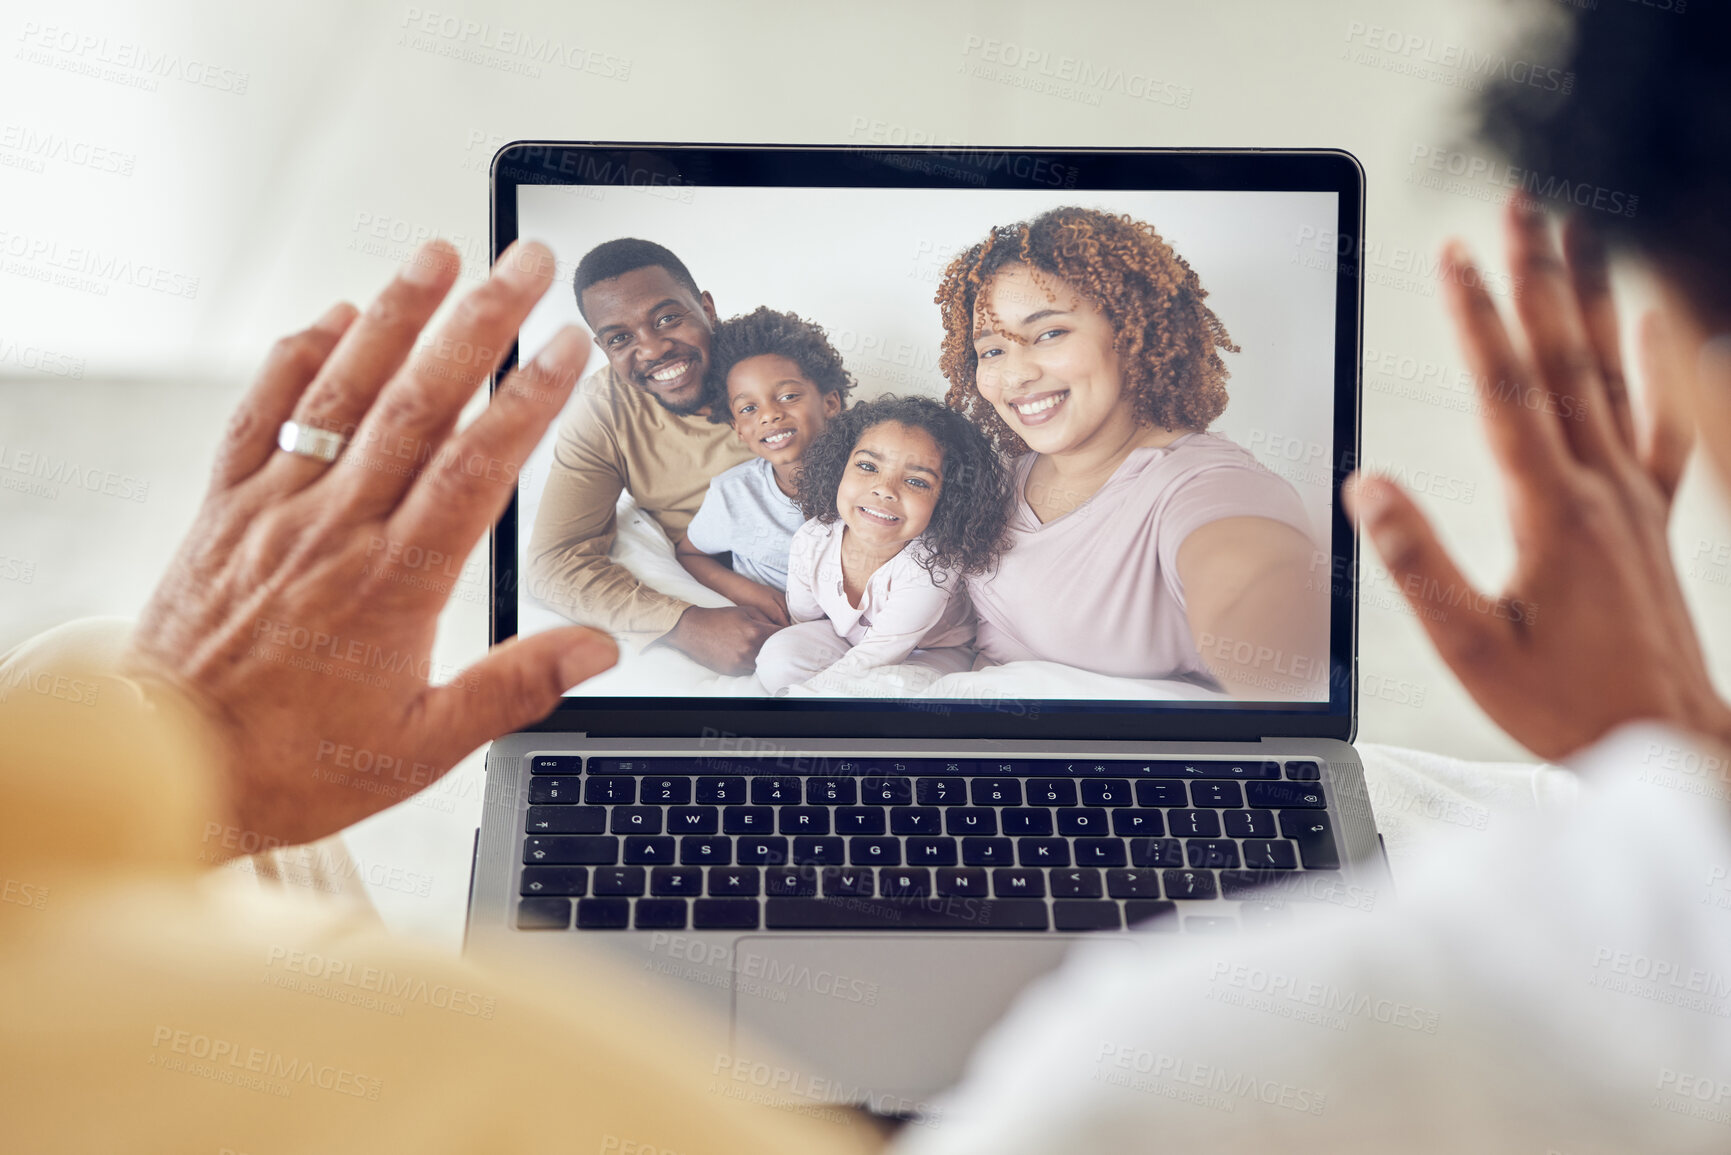 Buy stock photo Laptop screen, video call and family, communication and love, grandparents wave with parents and children. Hands, face and care with technology and people with virtual chat, wellbeing and generations